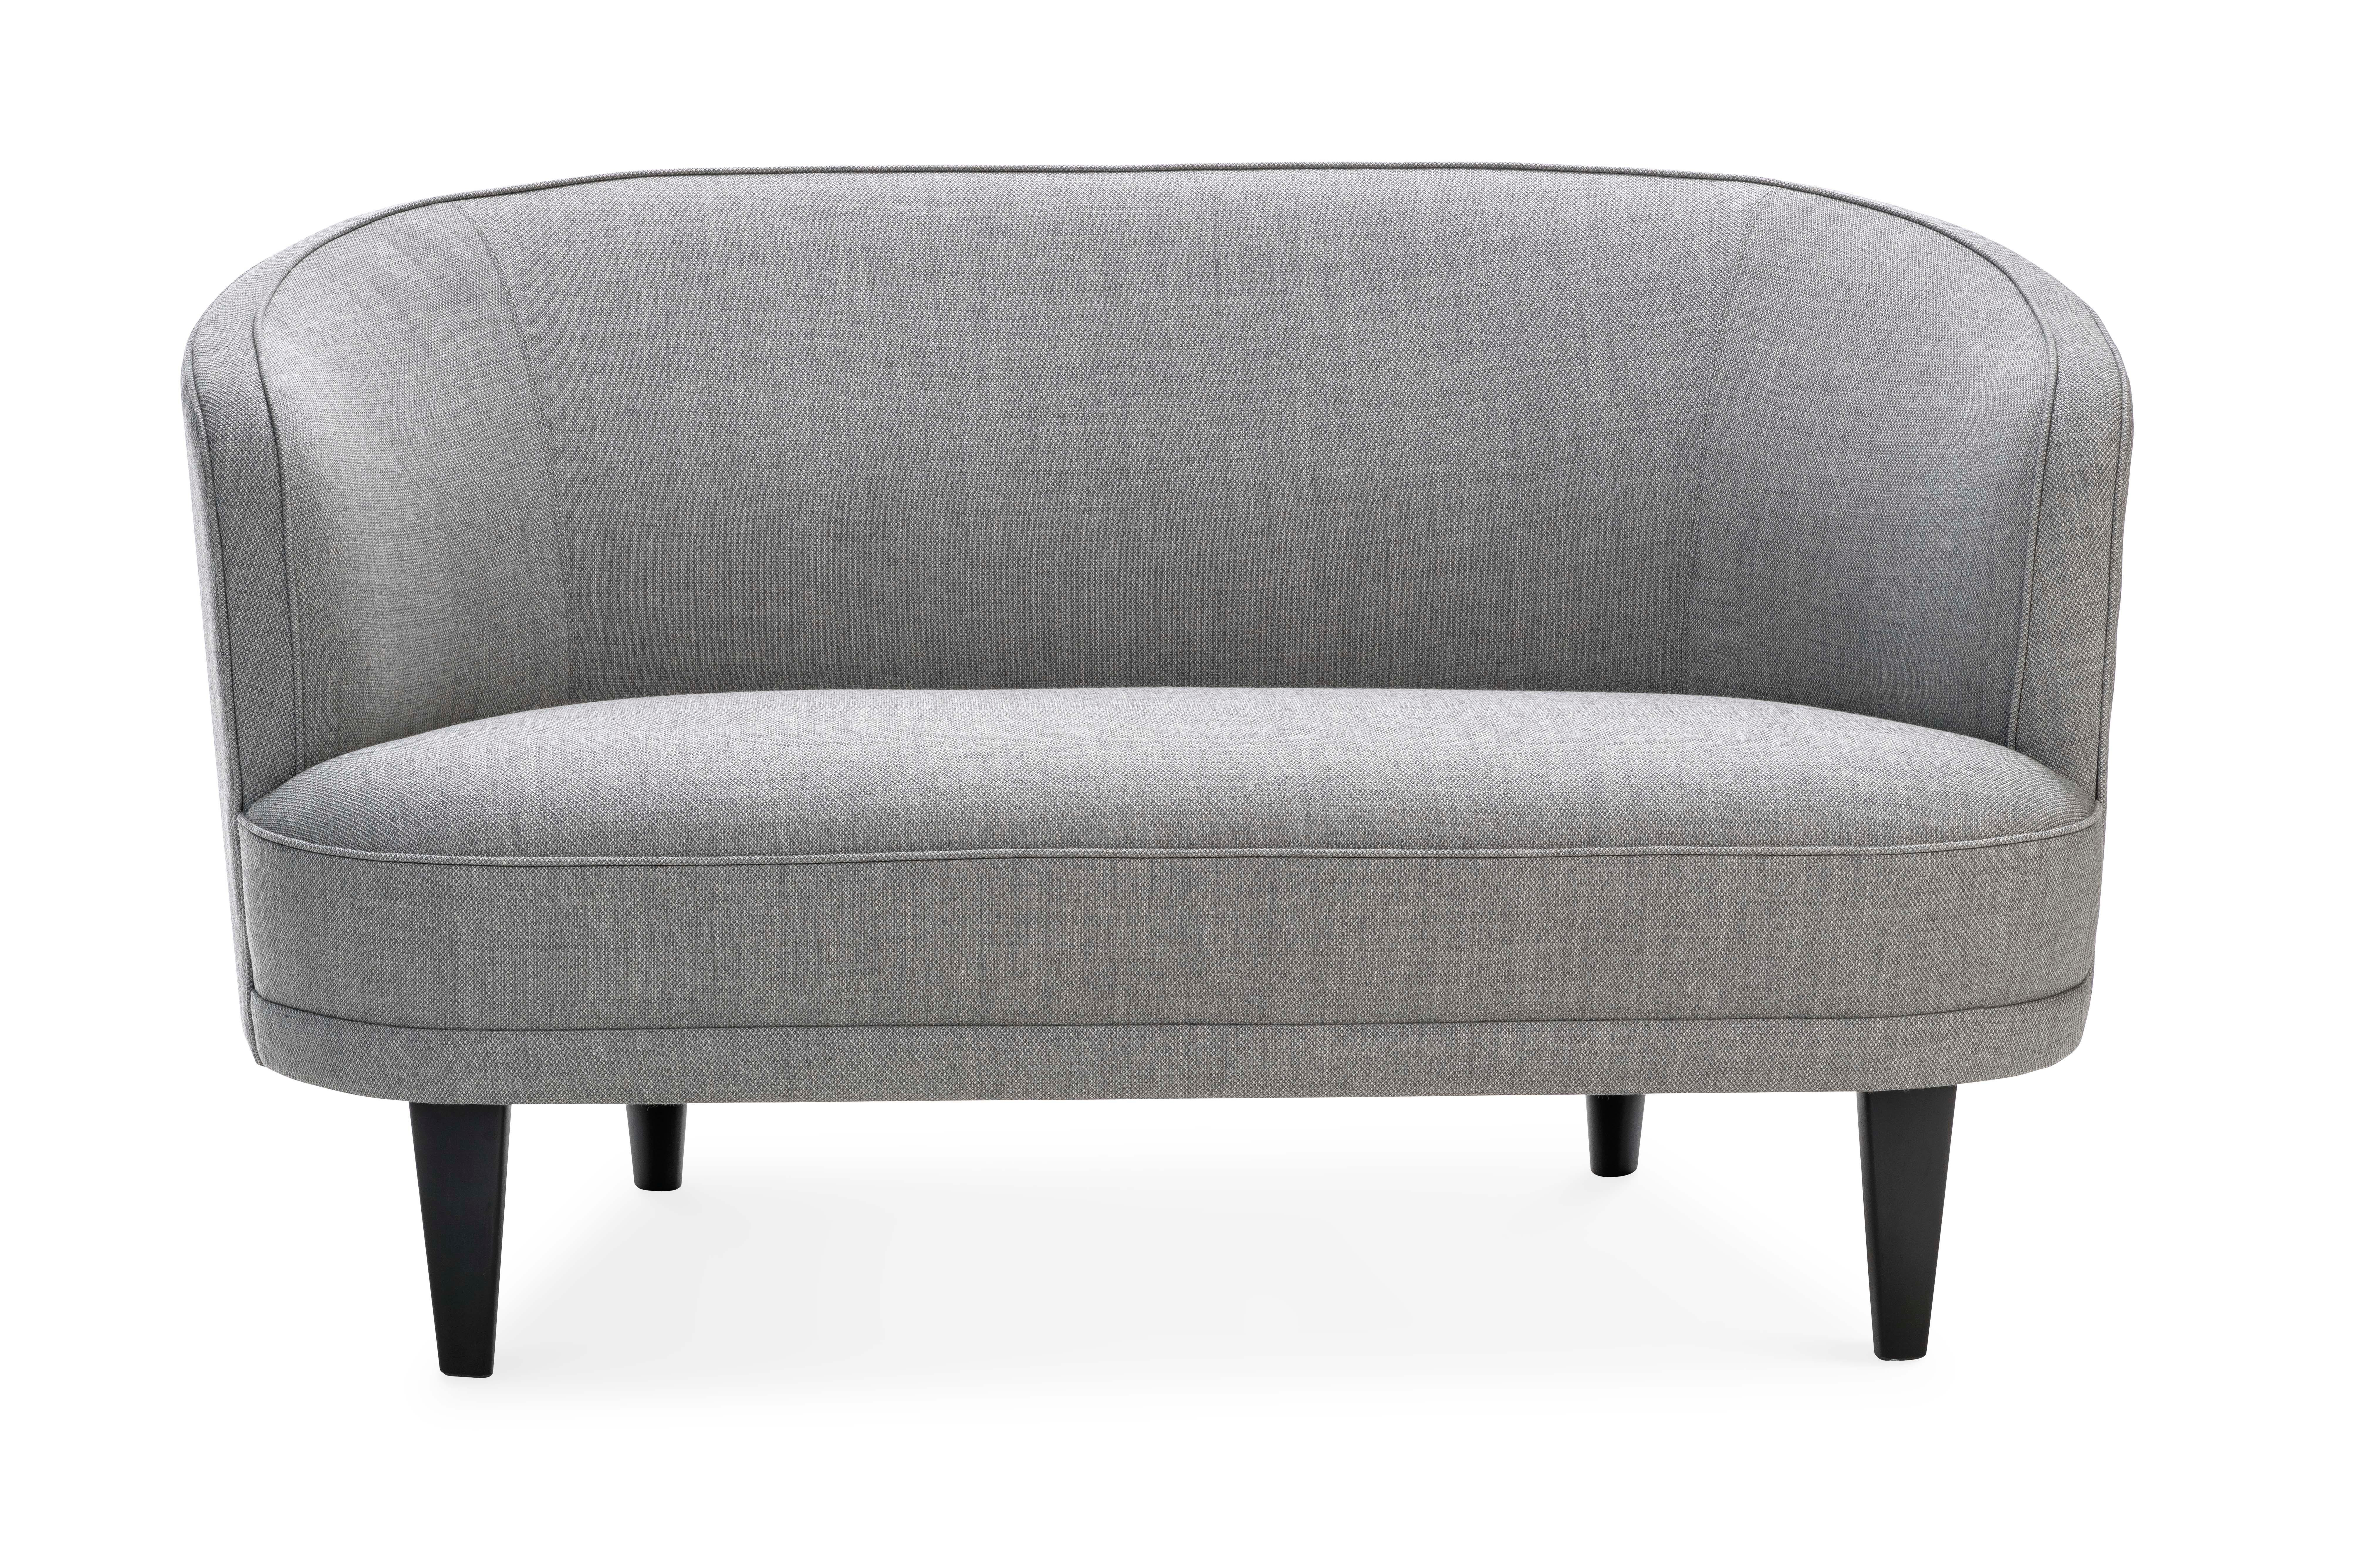 In 1937, Carl Malmsten designed a sofa for the Swedish diplomatic mission in Berlin. He named the sofa Berlin. Twenty-one years later, he made some modifications to the design and thus called it New Berlin. The Nya Berlin (New Berlin) sofa was first